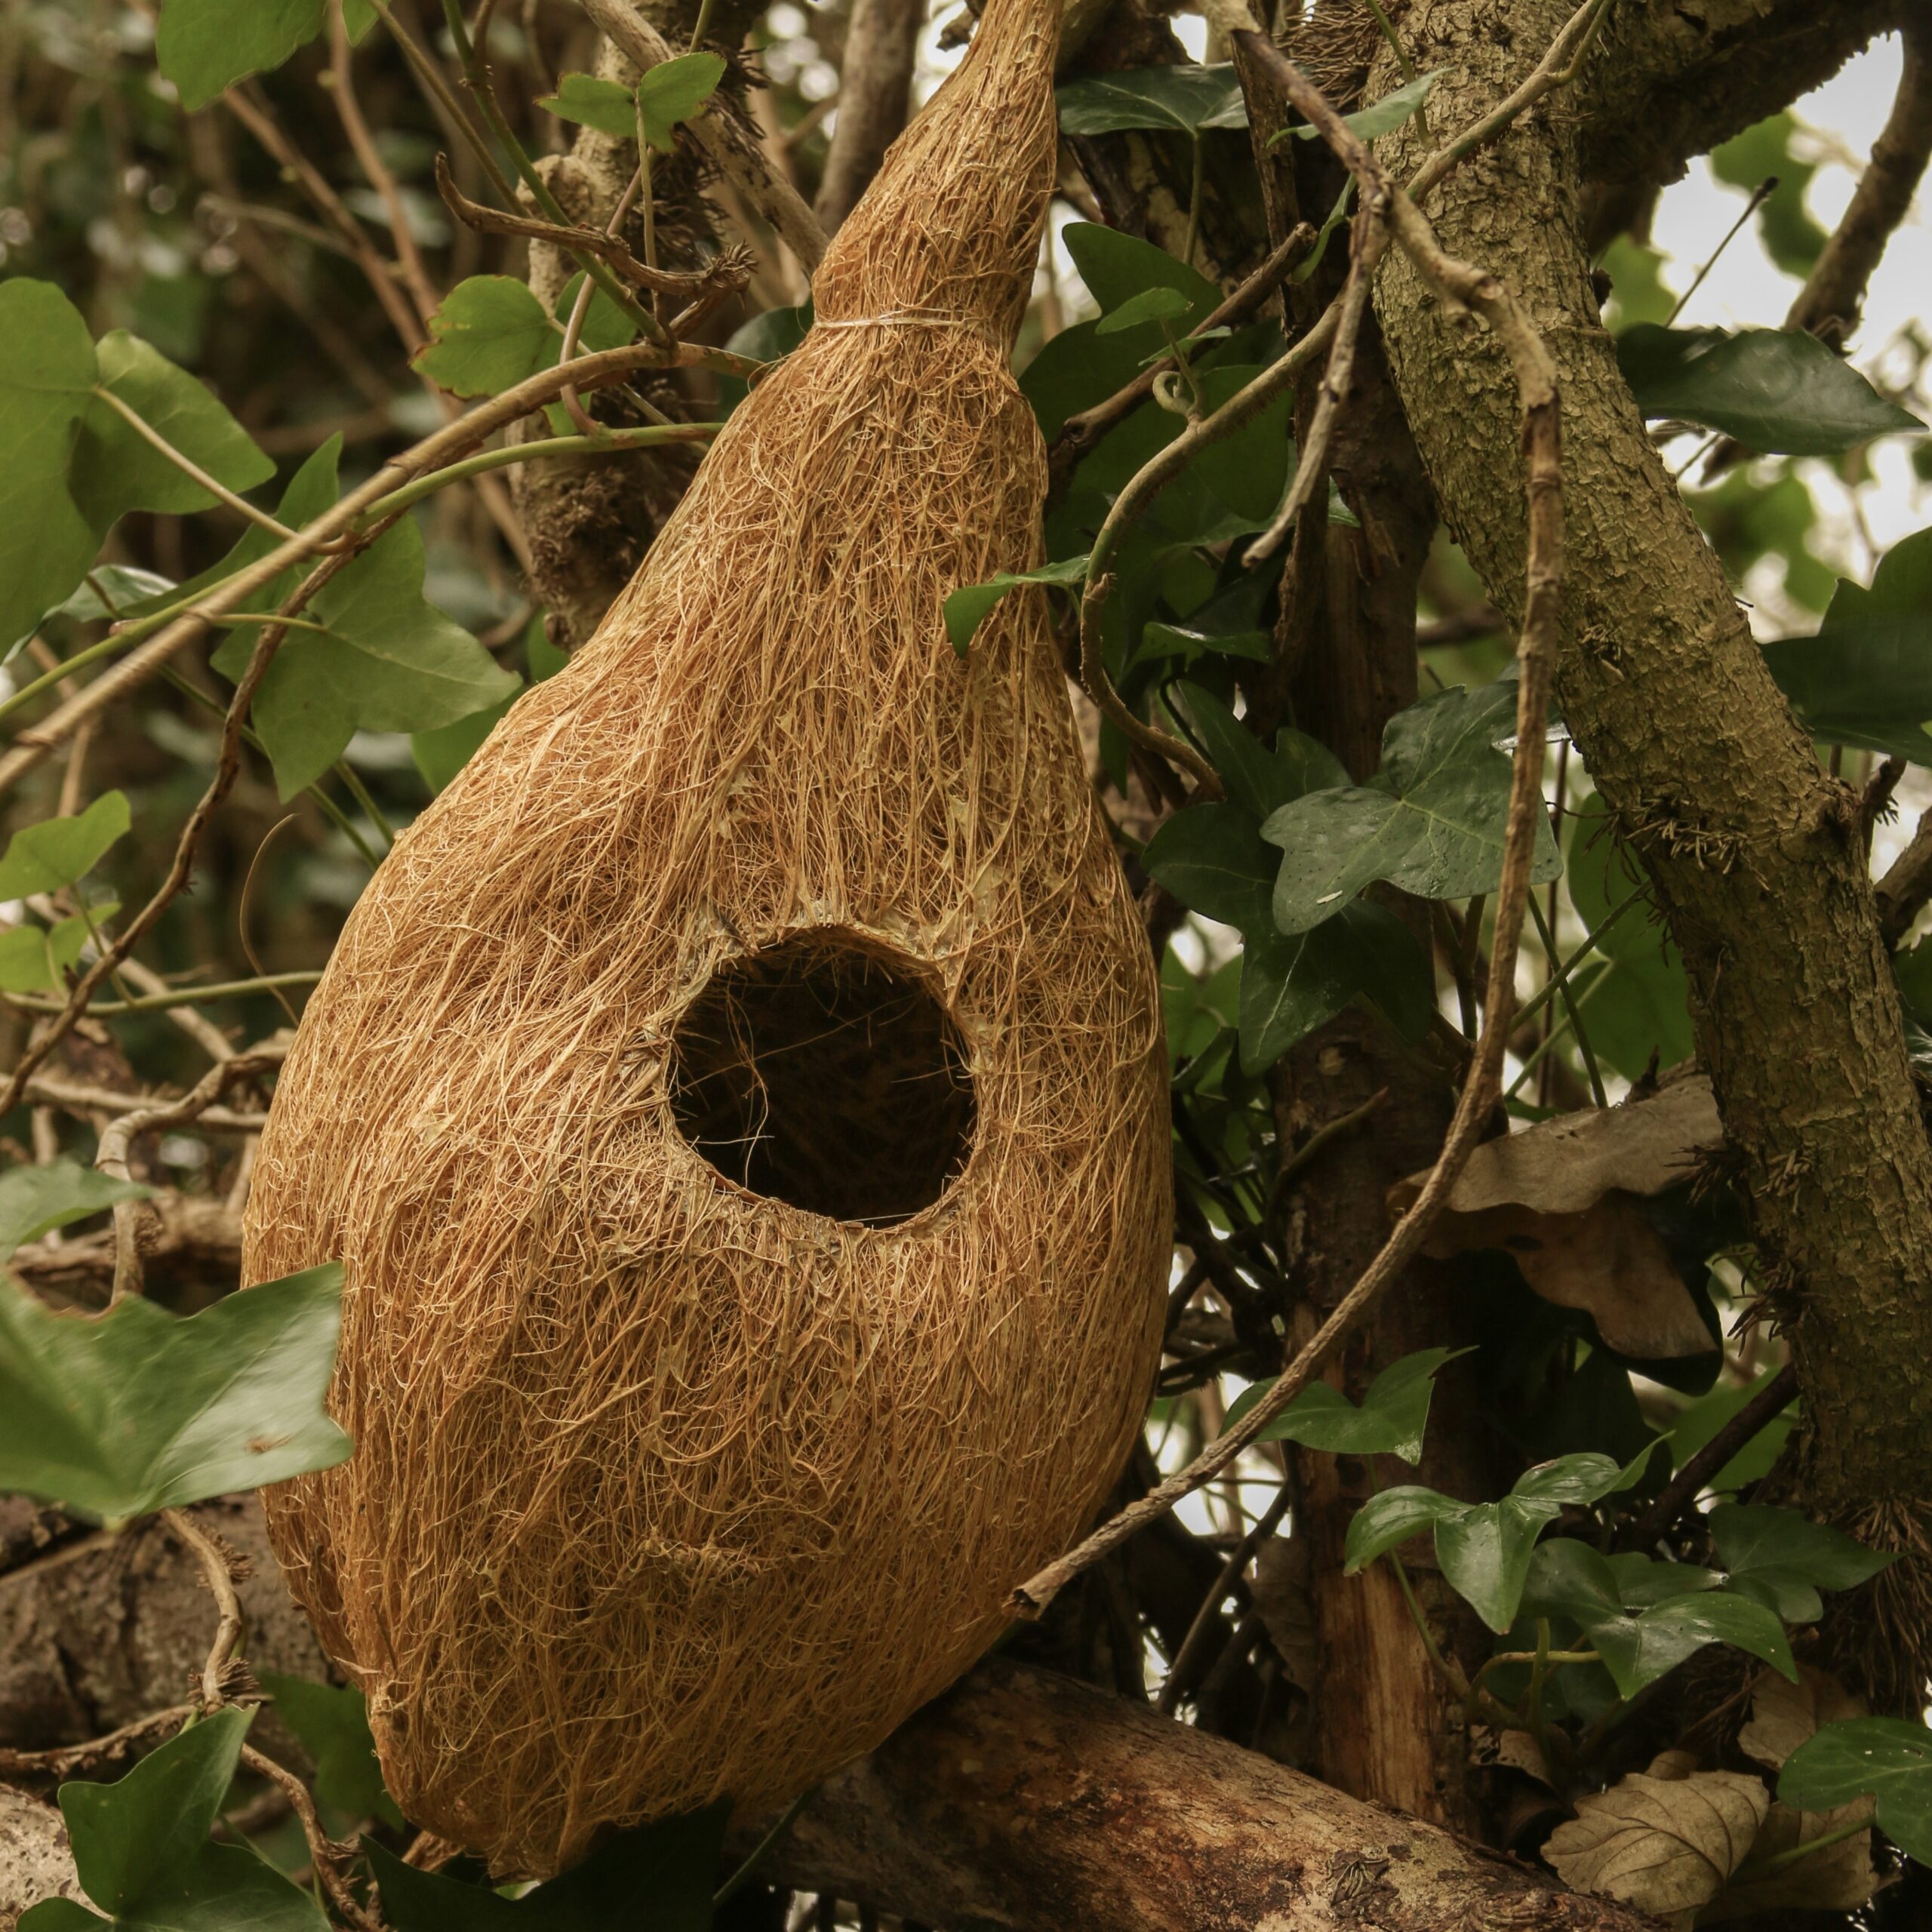 Bird Nests In Small Medium And Large Sizes